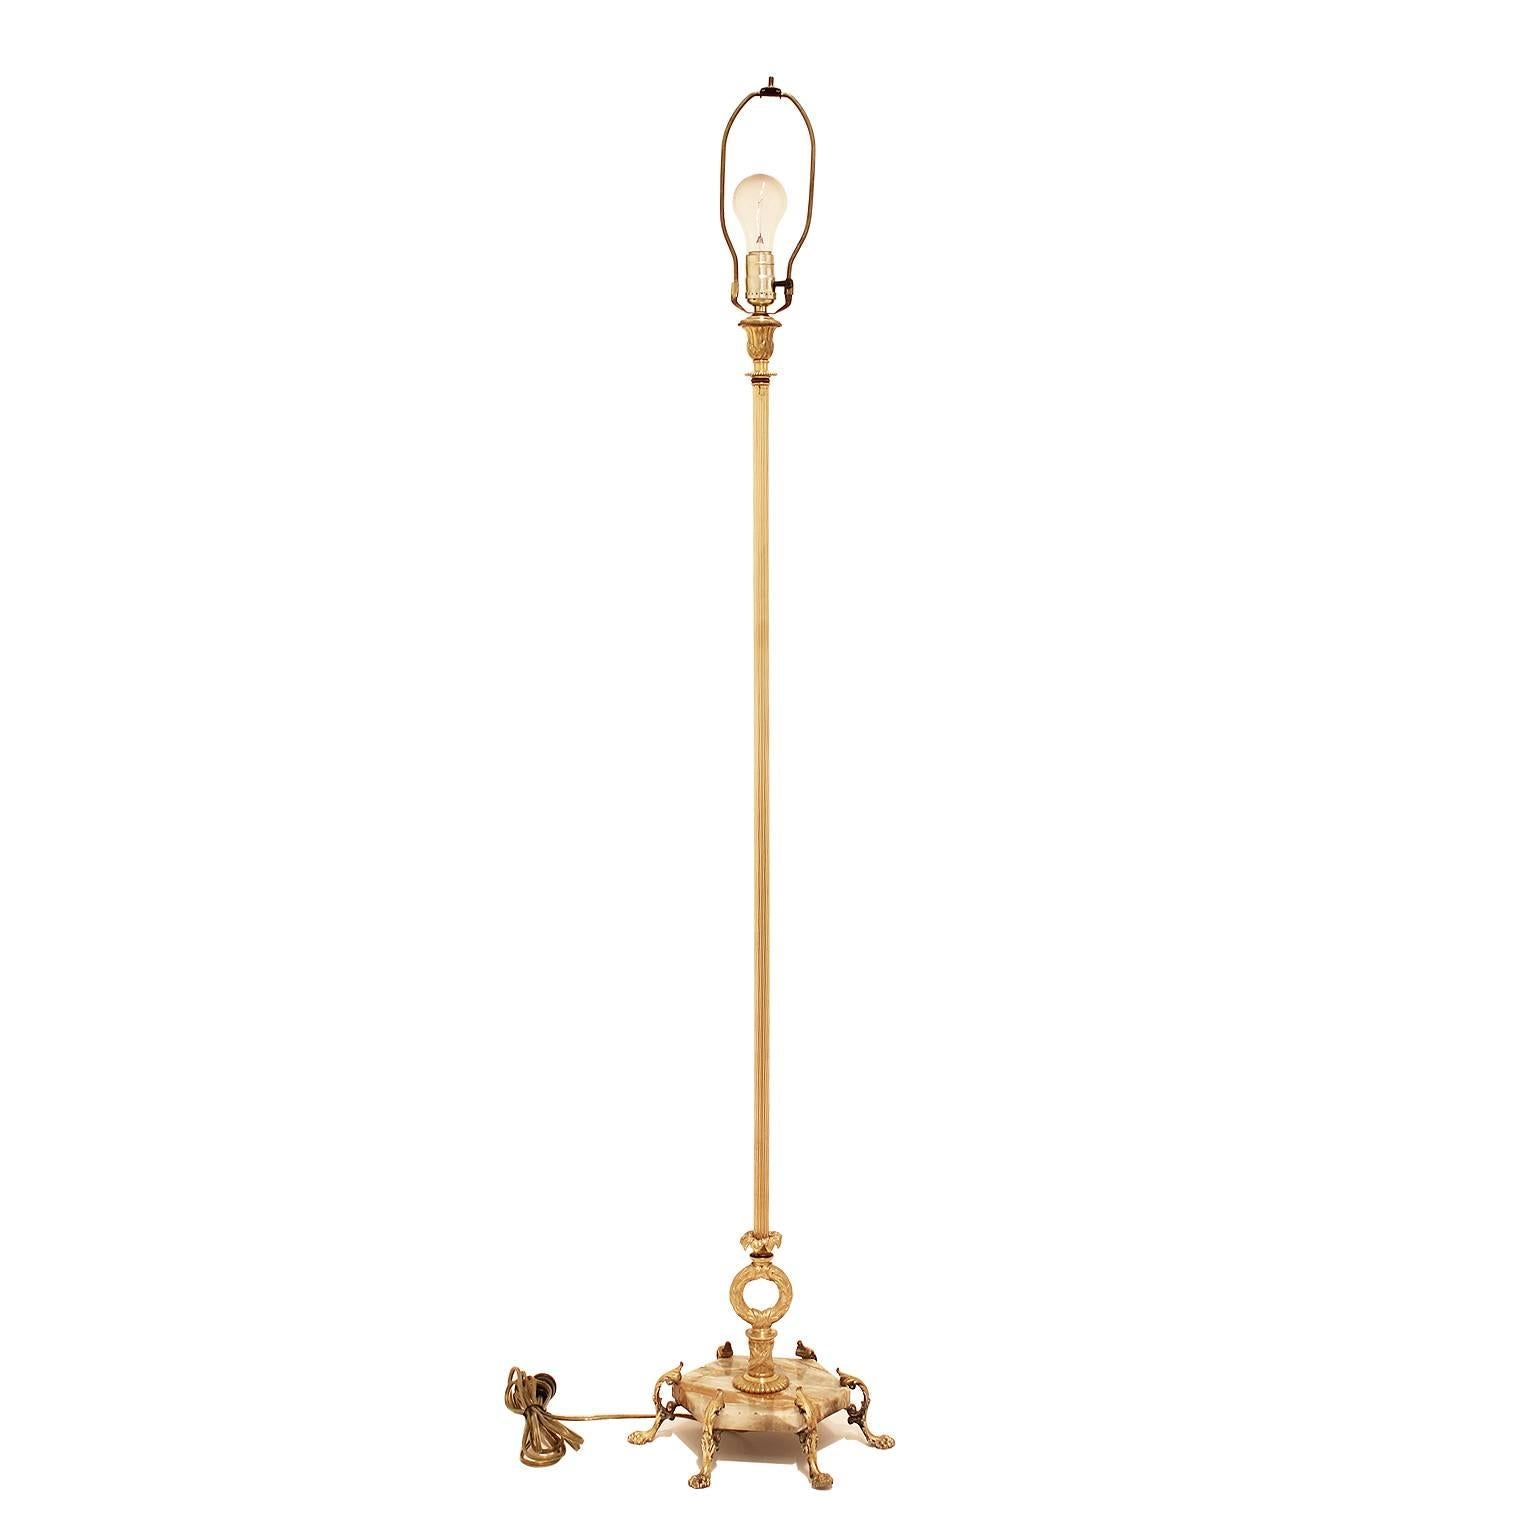 A rare 1920s French claw foot brass floor lamp with marble base.